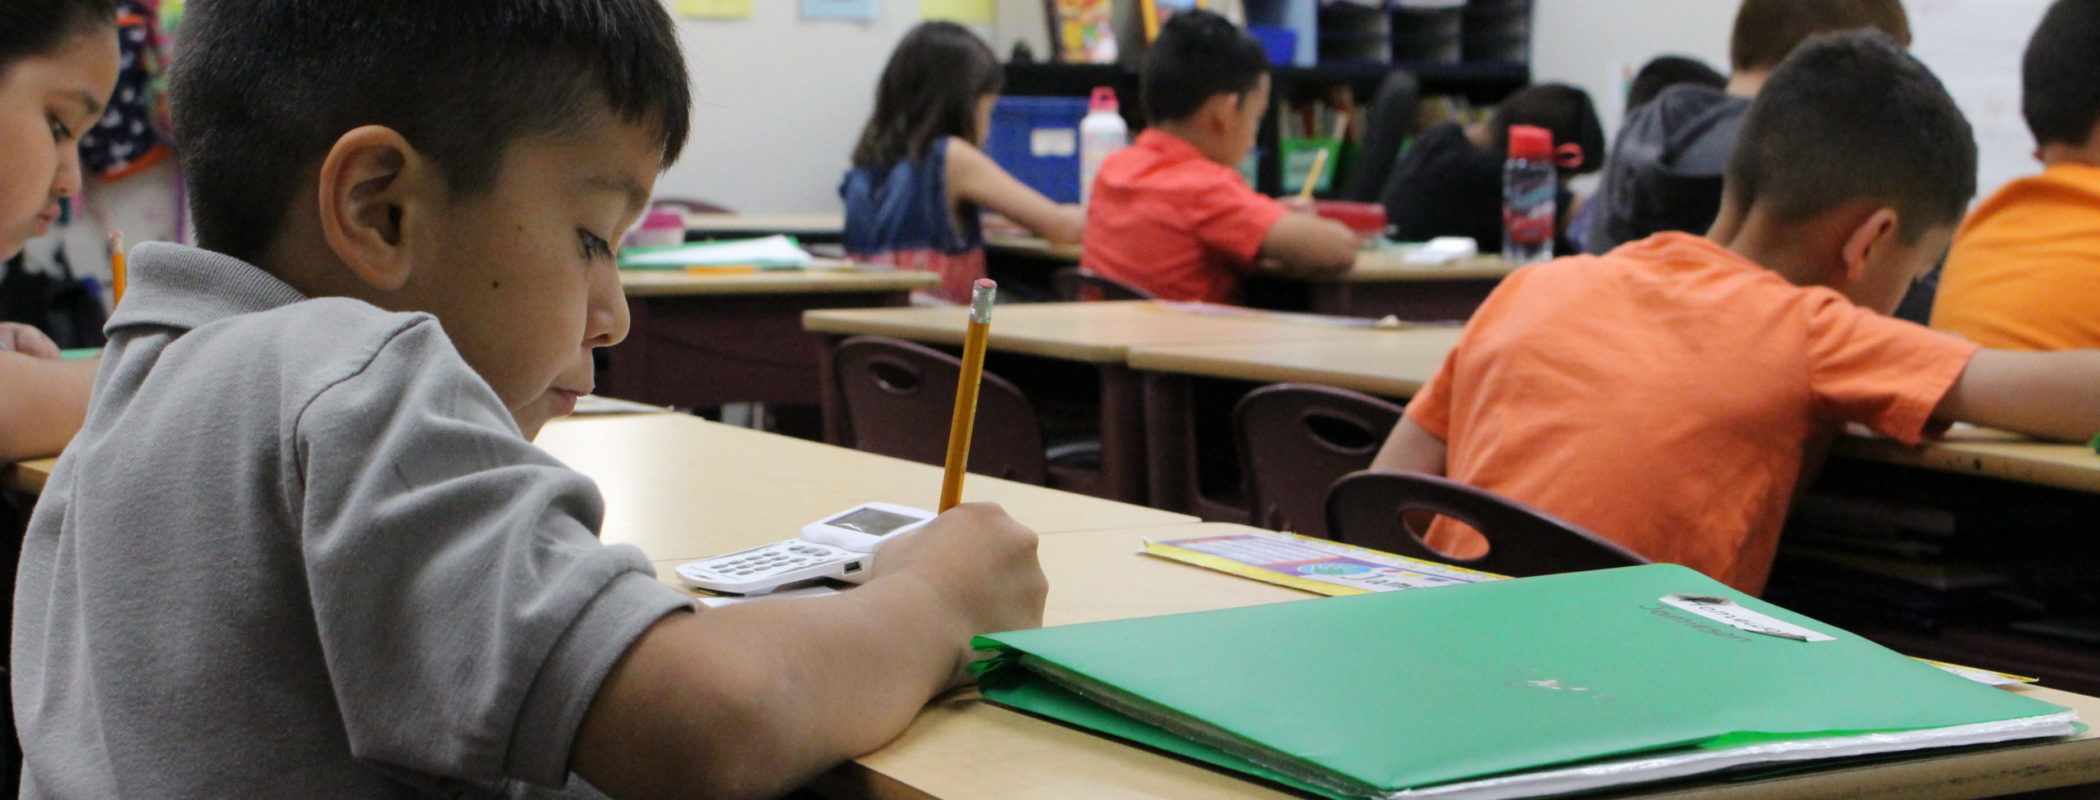 Arizona Capitol Times: Bill gives schools flexibility in meeting needs of each student